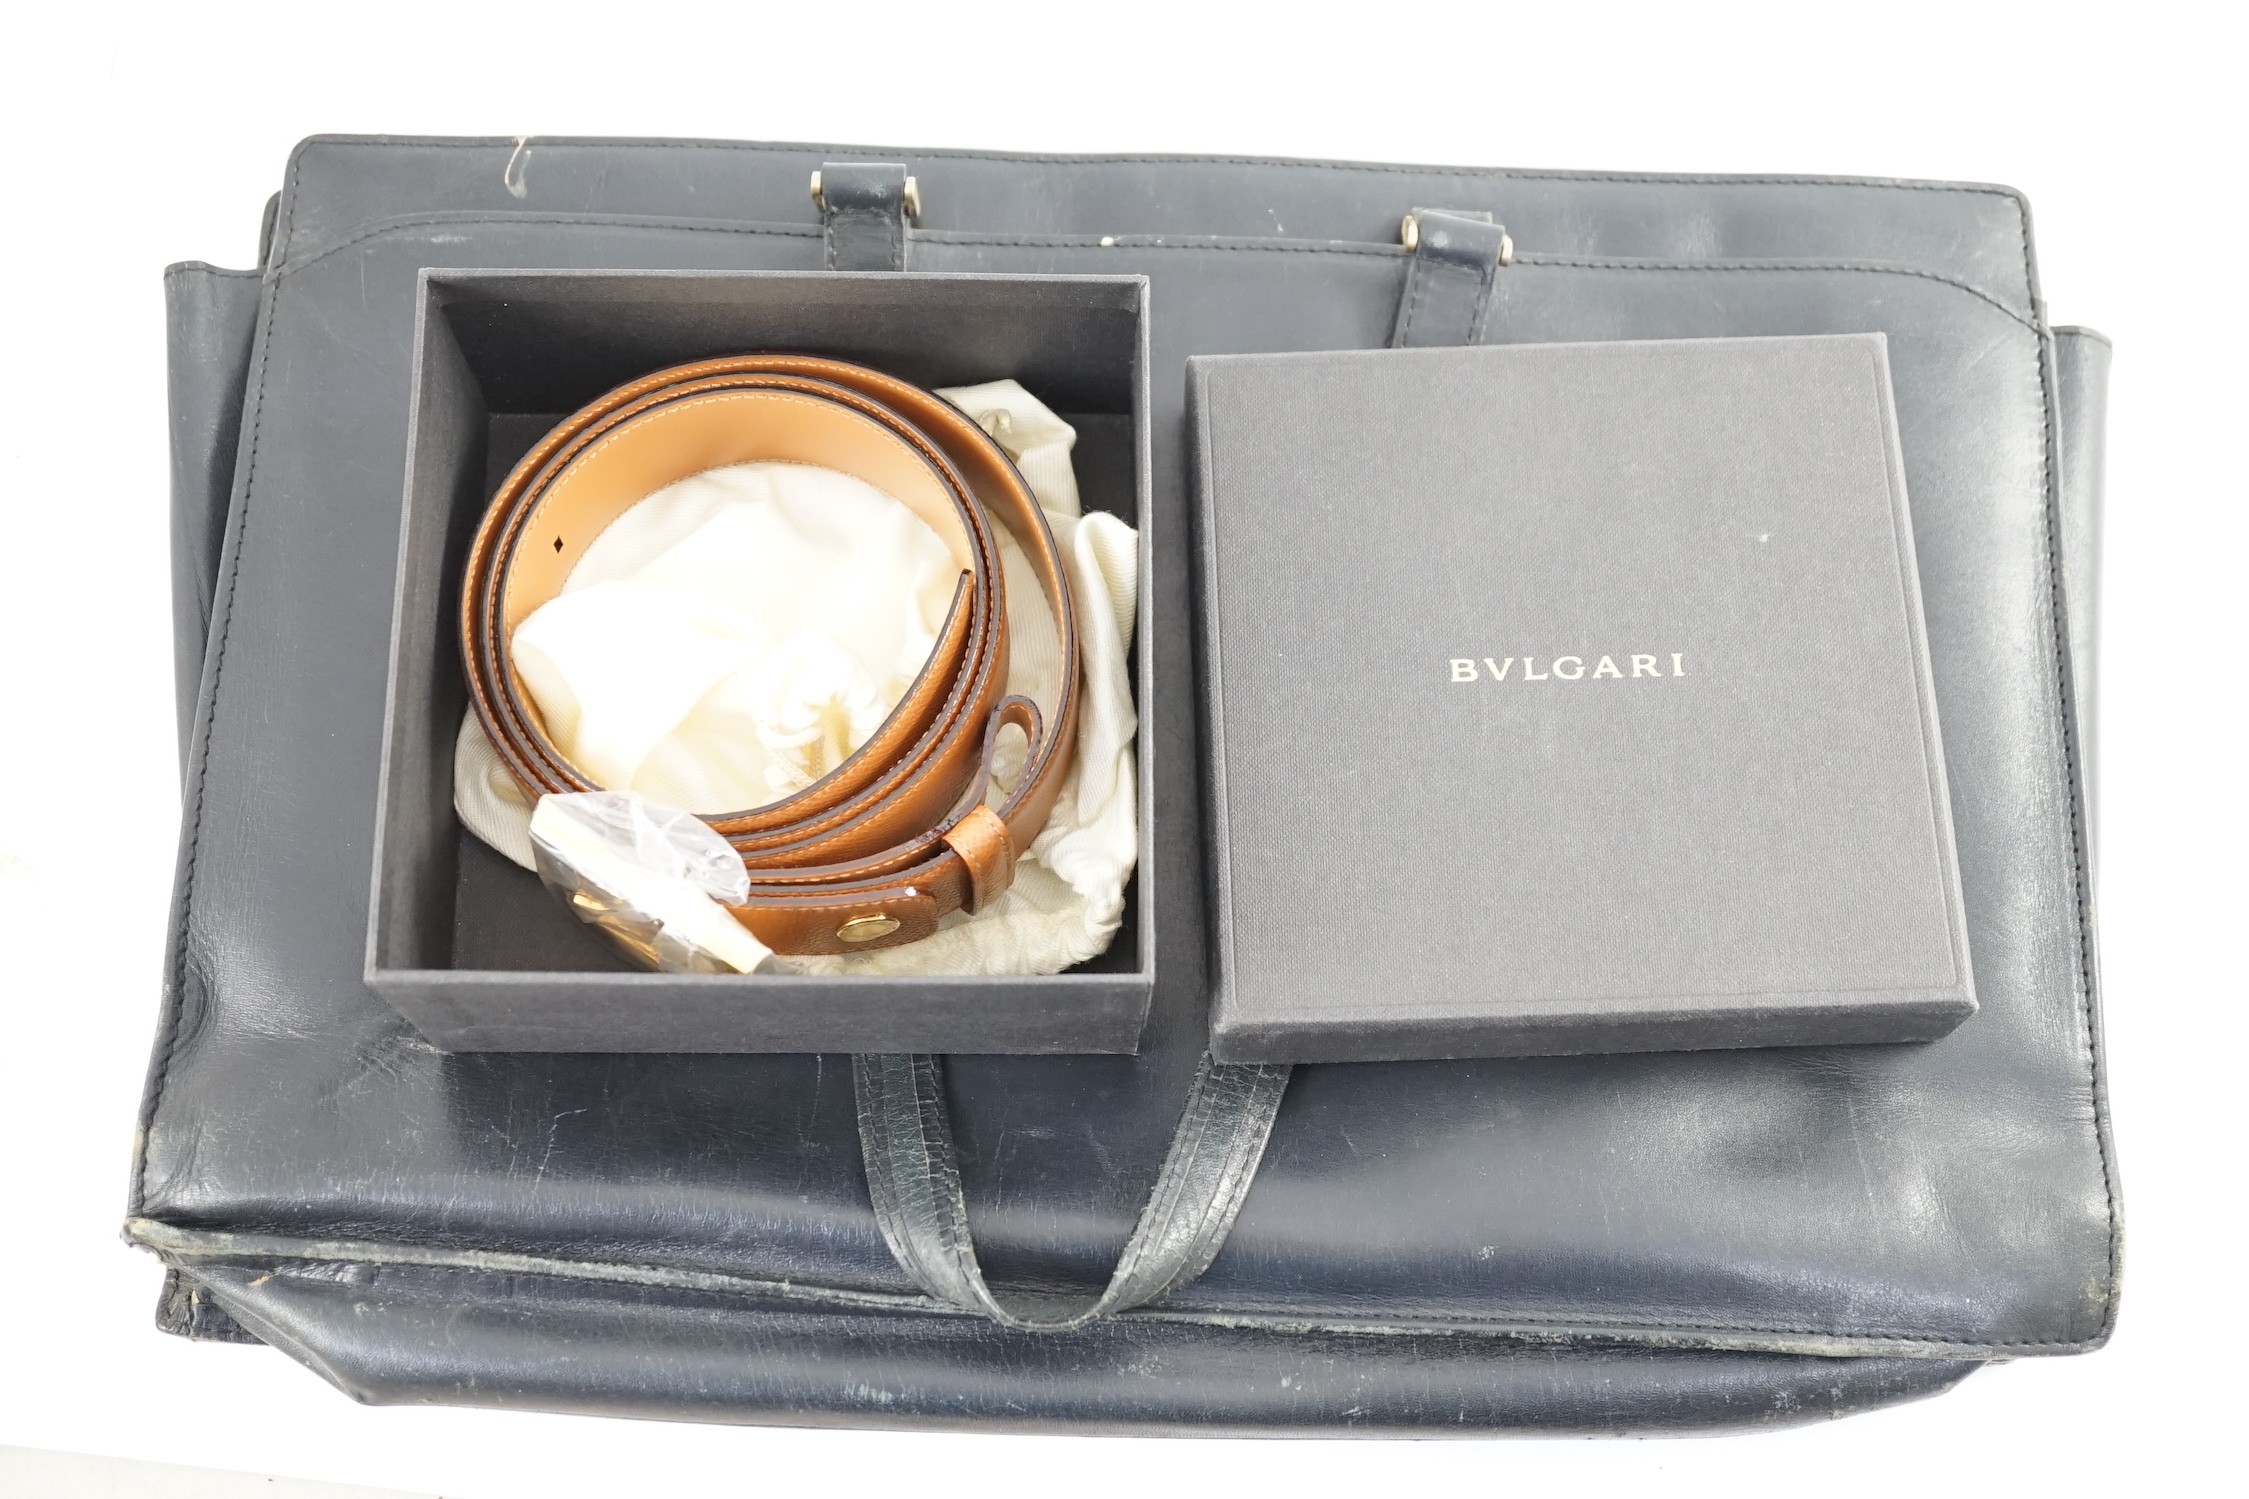 A Bulgari tan leather belt (unused), 115 cm, boxed with bag and a worn Asprey black leather attaché case